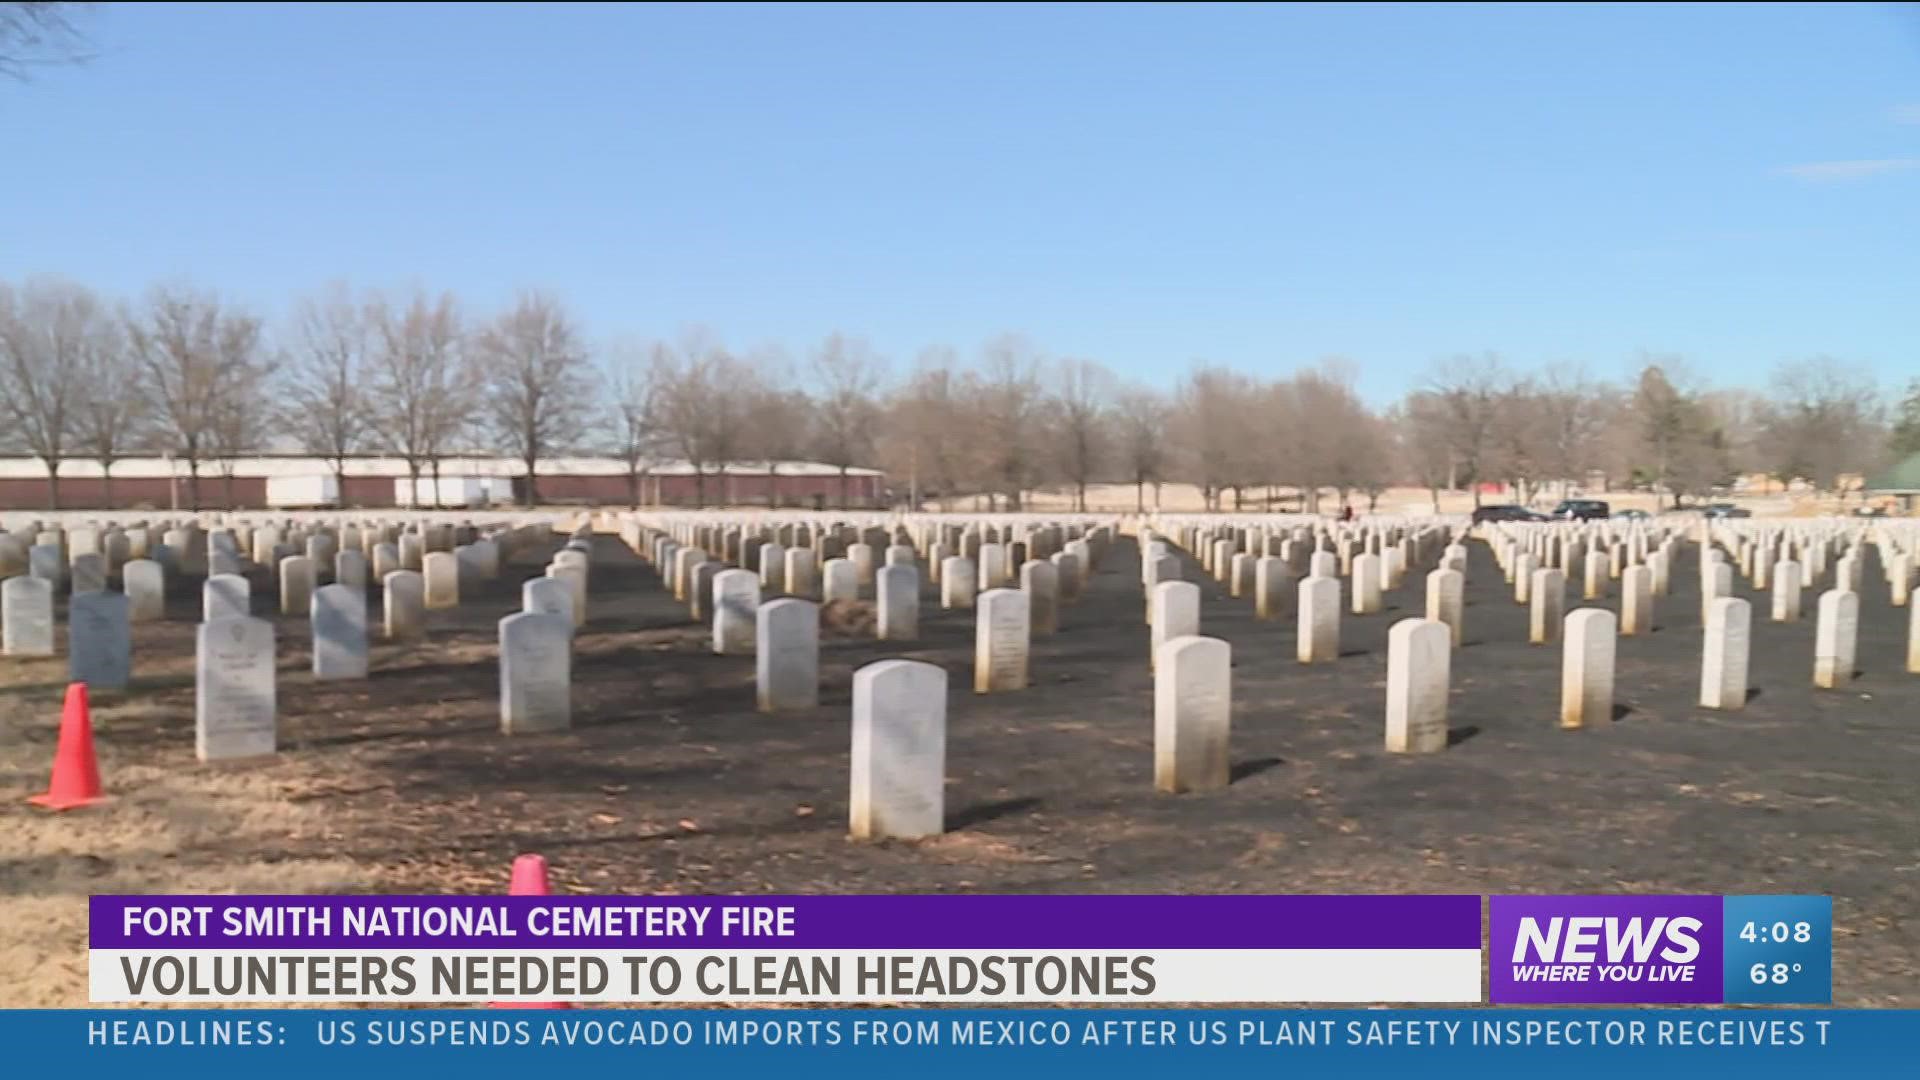 Fires swept through the Fort Smith National Cemetery, leaving behind rows of damaged headstones. https://bit.ly/3oKHdL9